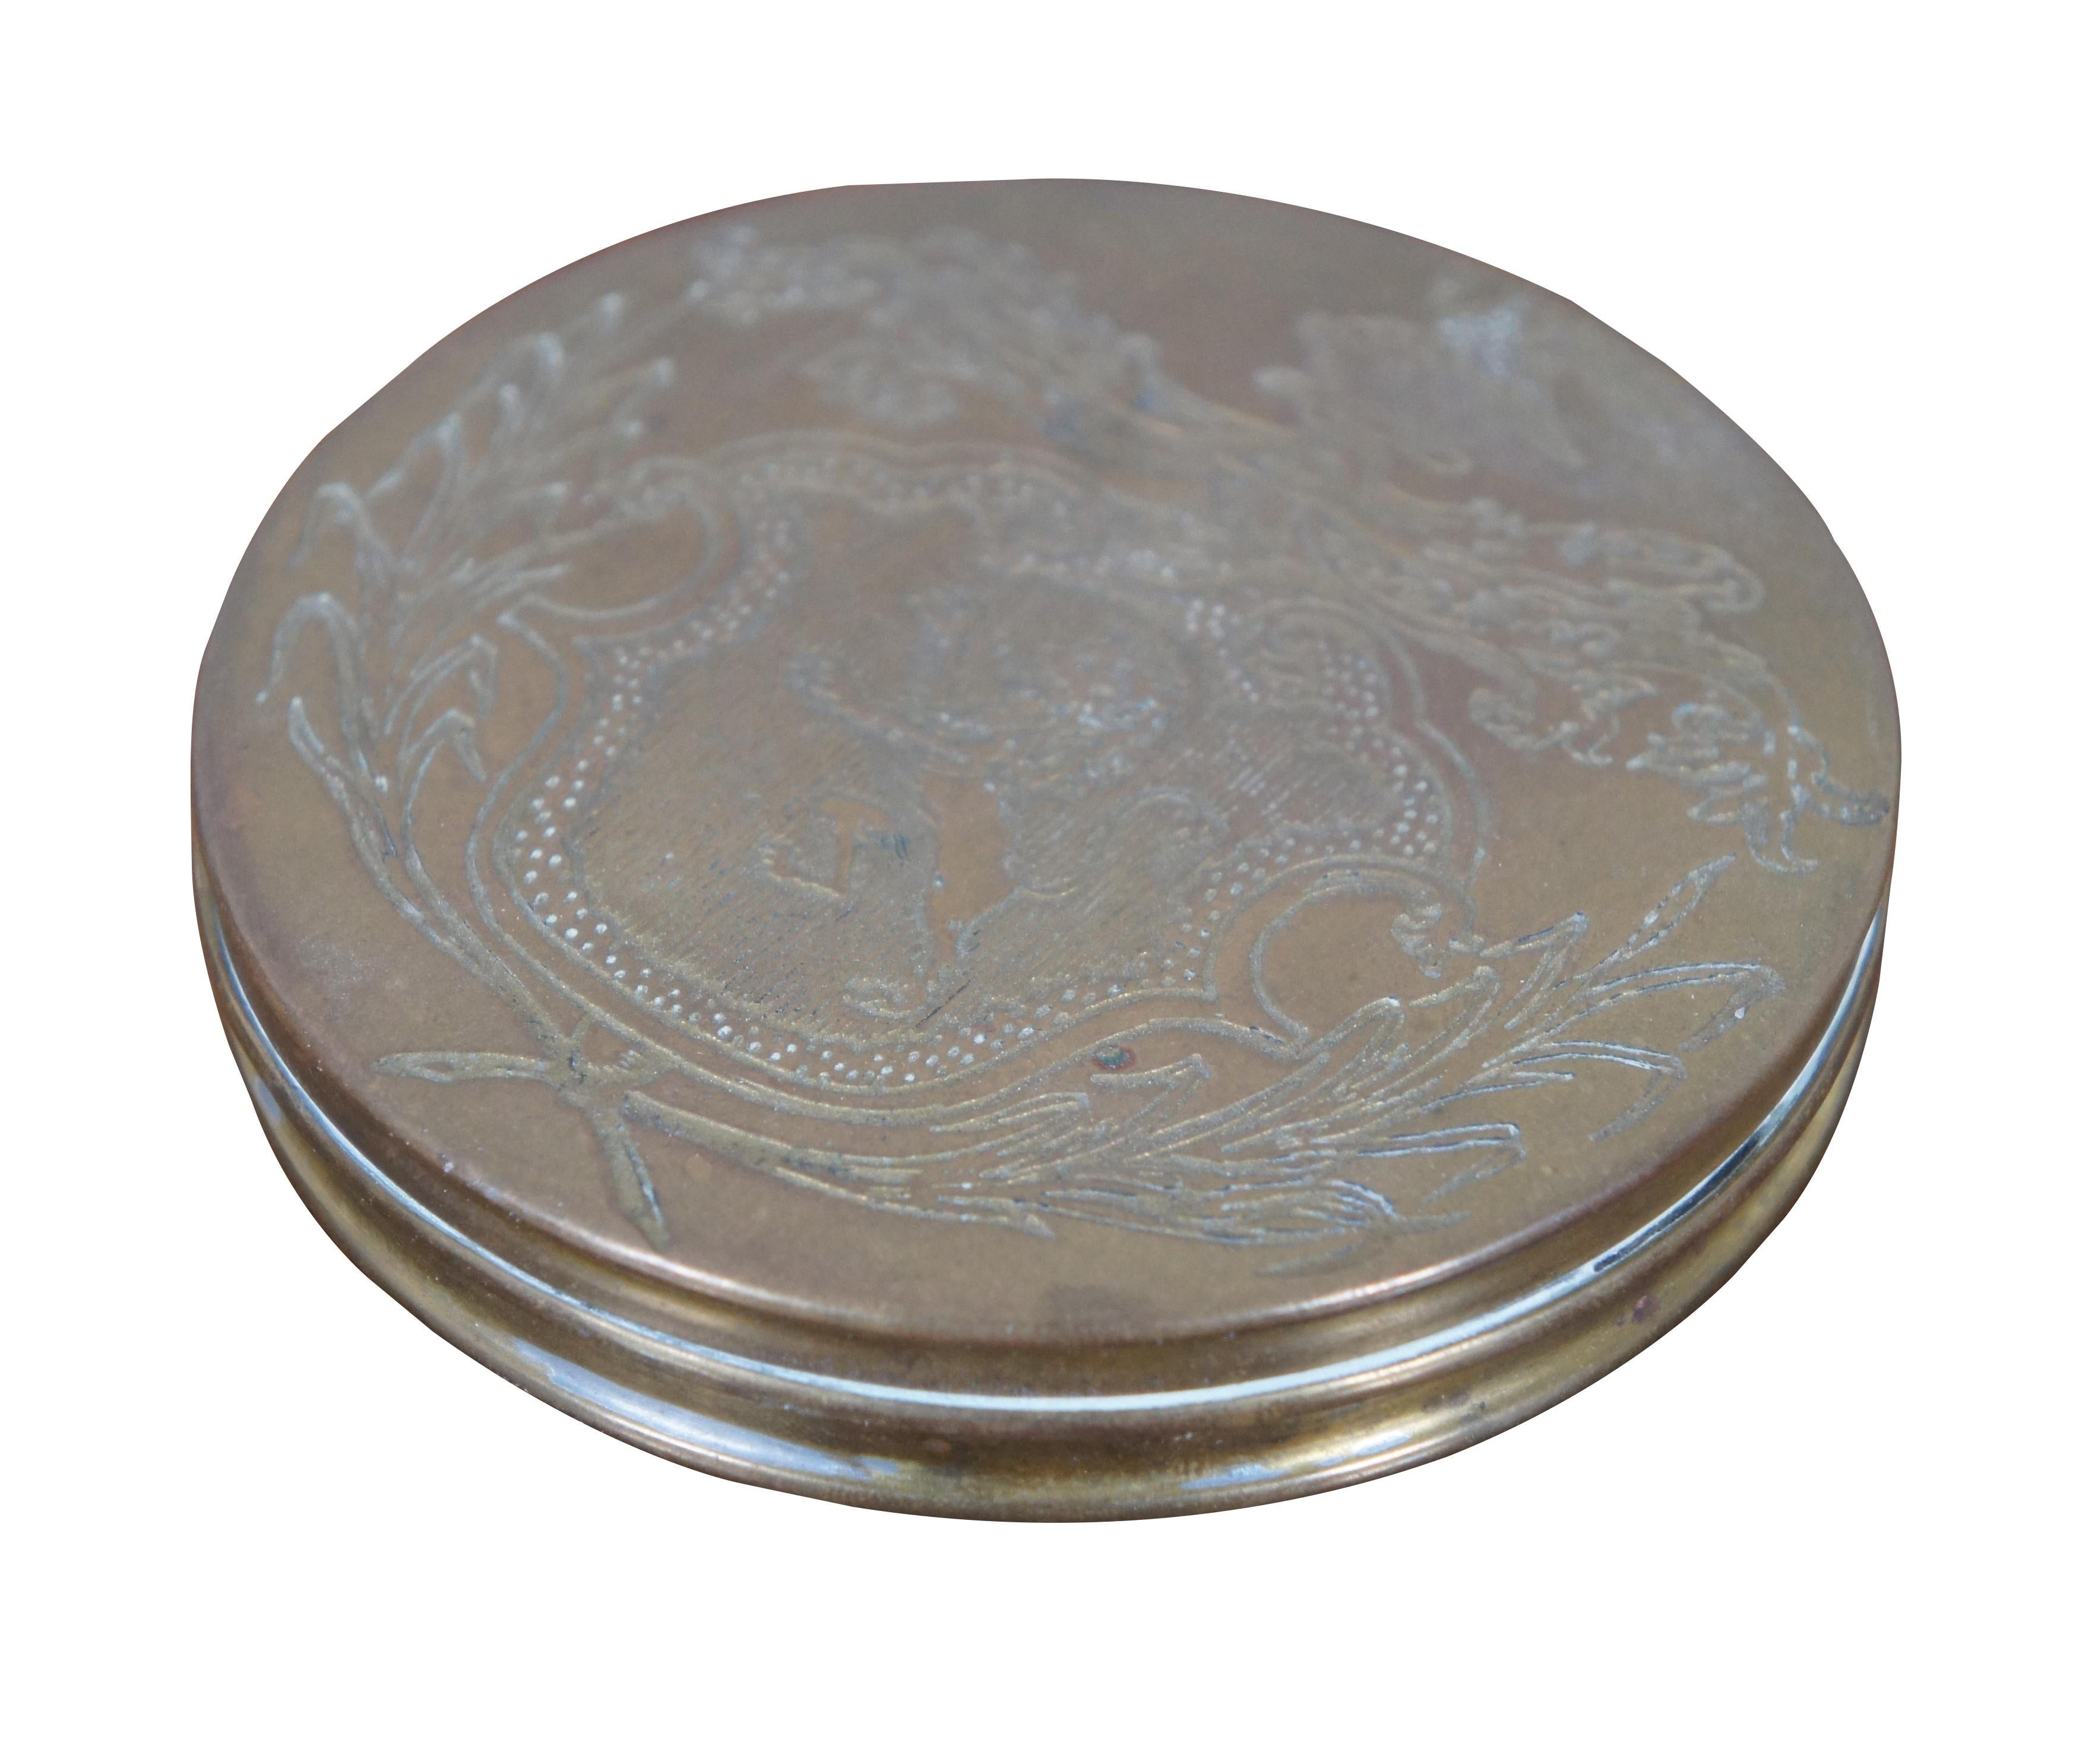 Vintage reproduction brass snuff / trinket / pill box engraved with a coat of arms featuring a lion passant rearing on a shield or crest, surrounded by wheat sheaves, foliate leaves, and a swan on a nest; marked WM Adaptation. 

Province
Estate